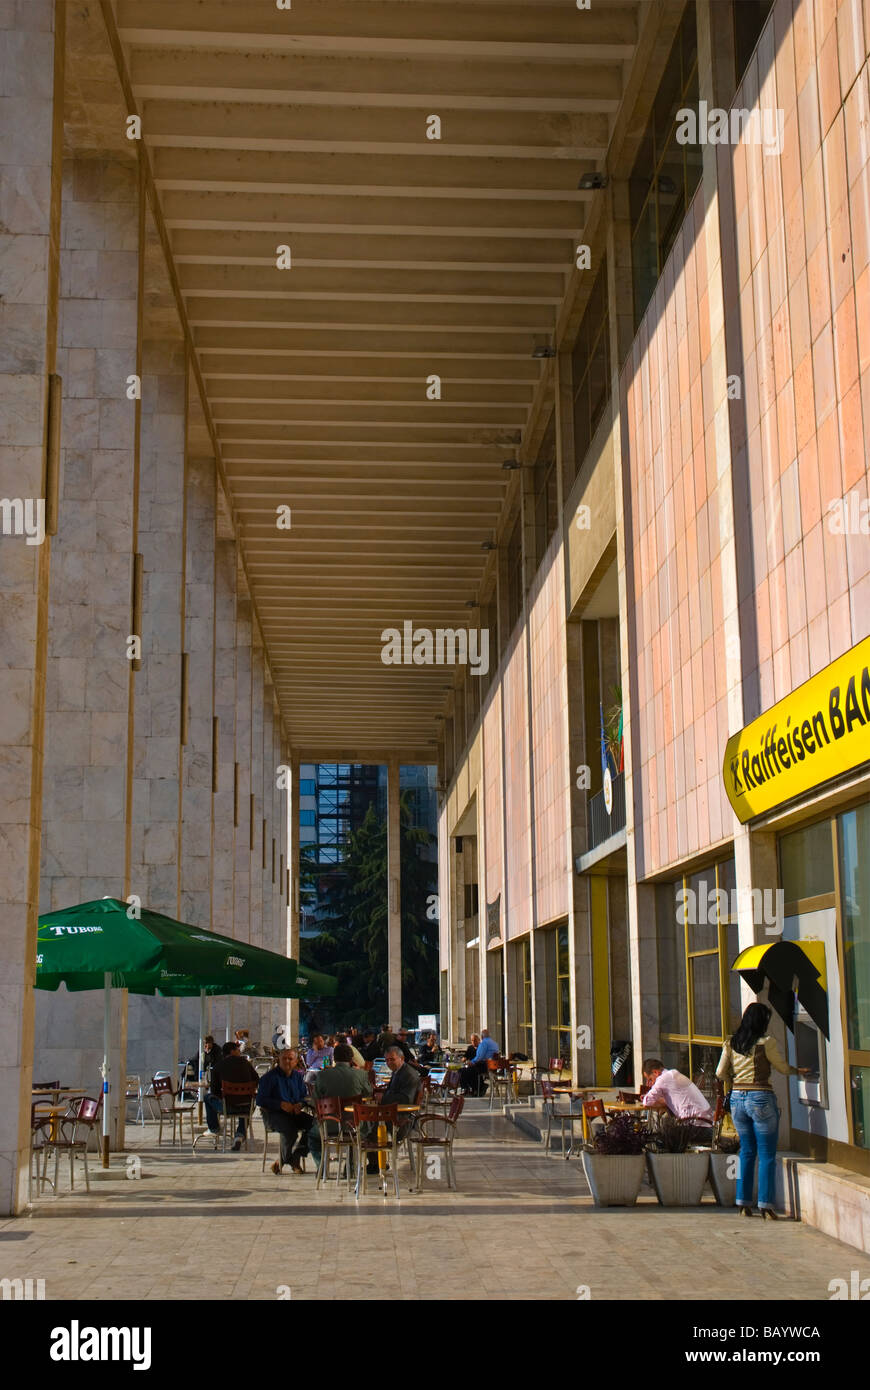 Cafe in front of Palace of Culture at Sheshi Skenderbej square in Tirana Albania Europe Stock Photo